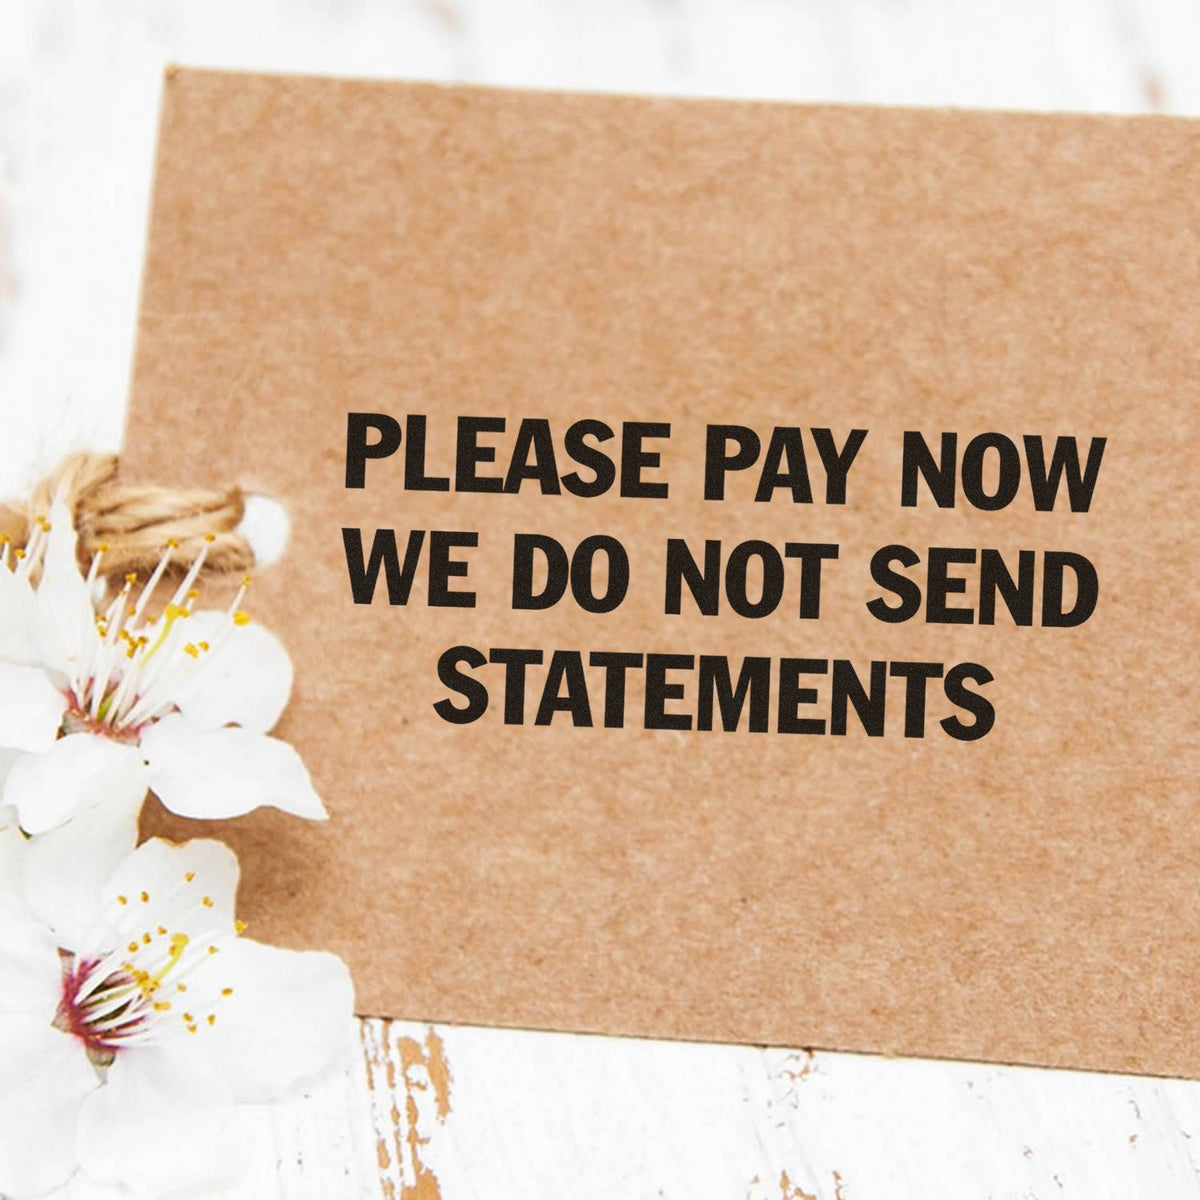 Please Pay Now No Statements Rubber Stamp Lifestyle Photo